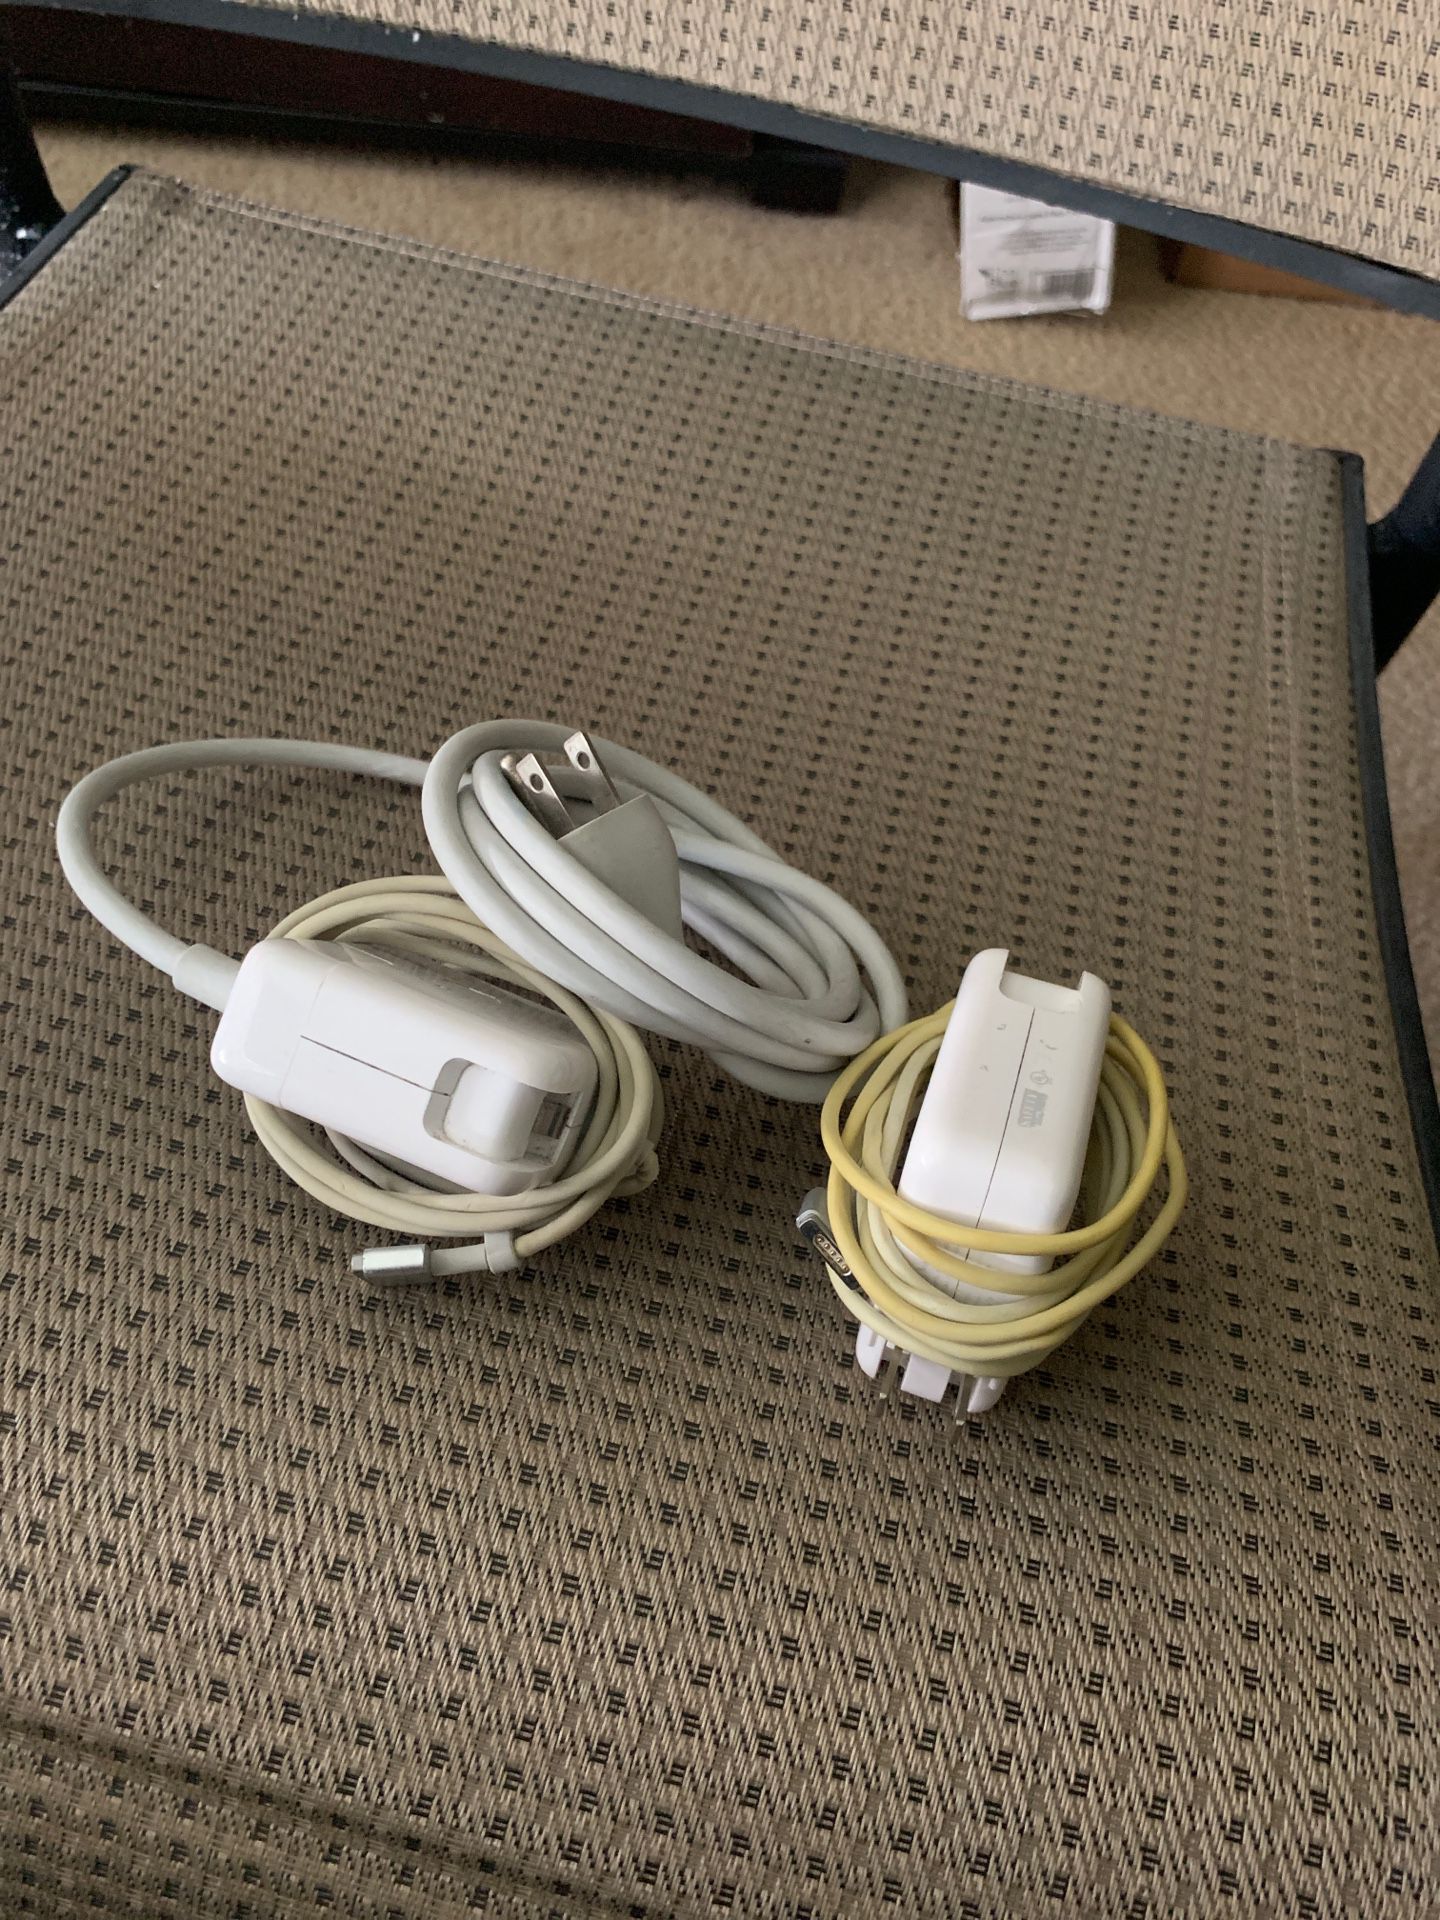 MacBook charger